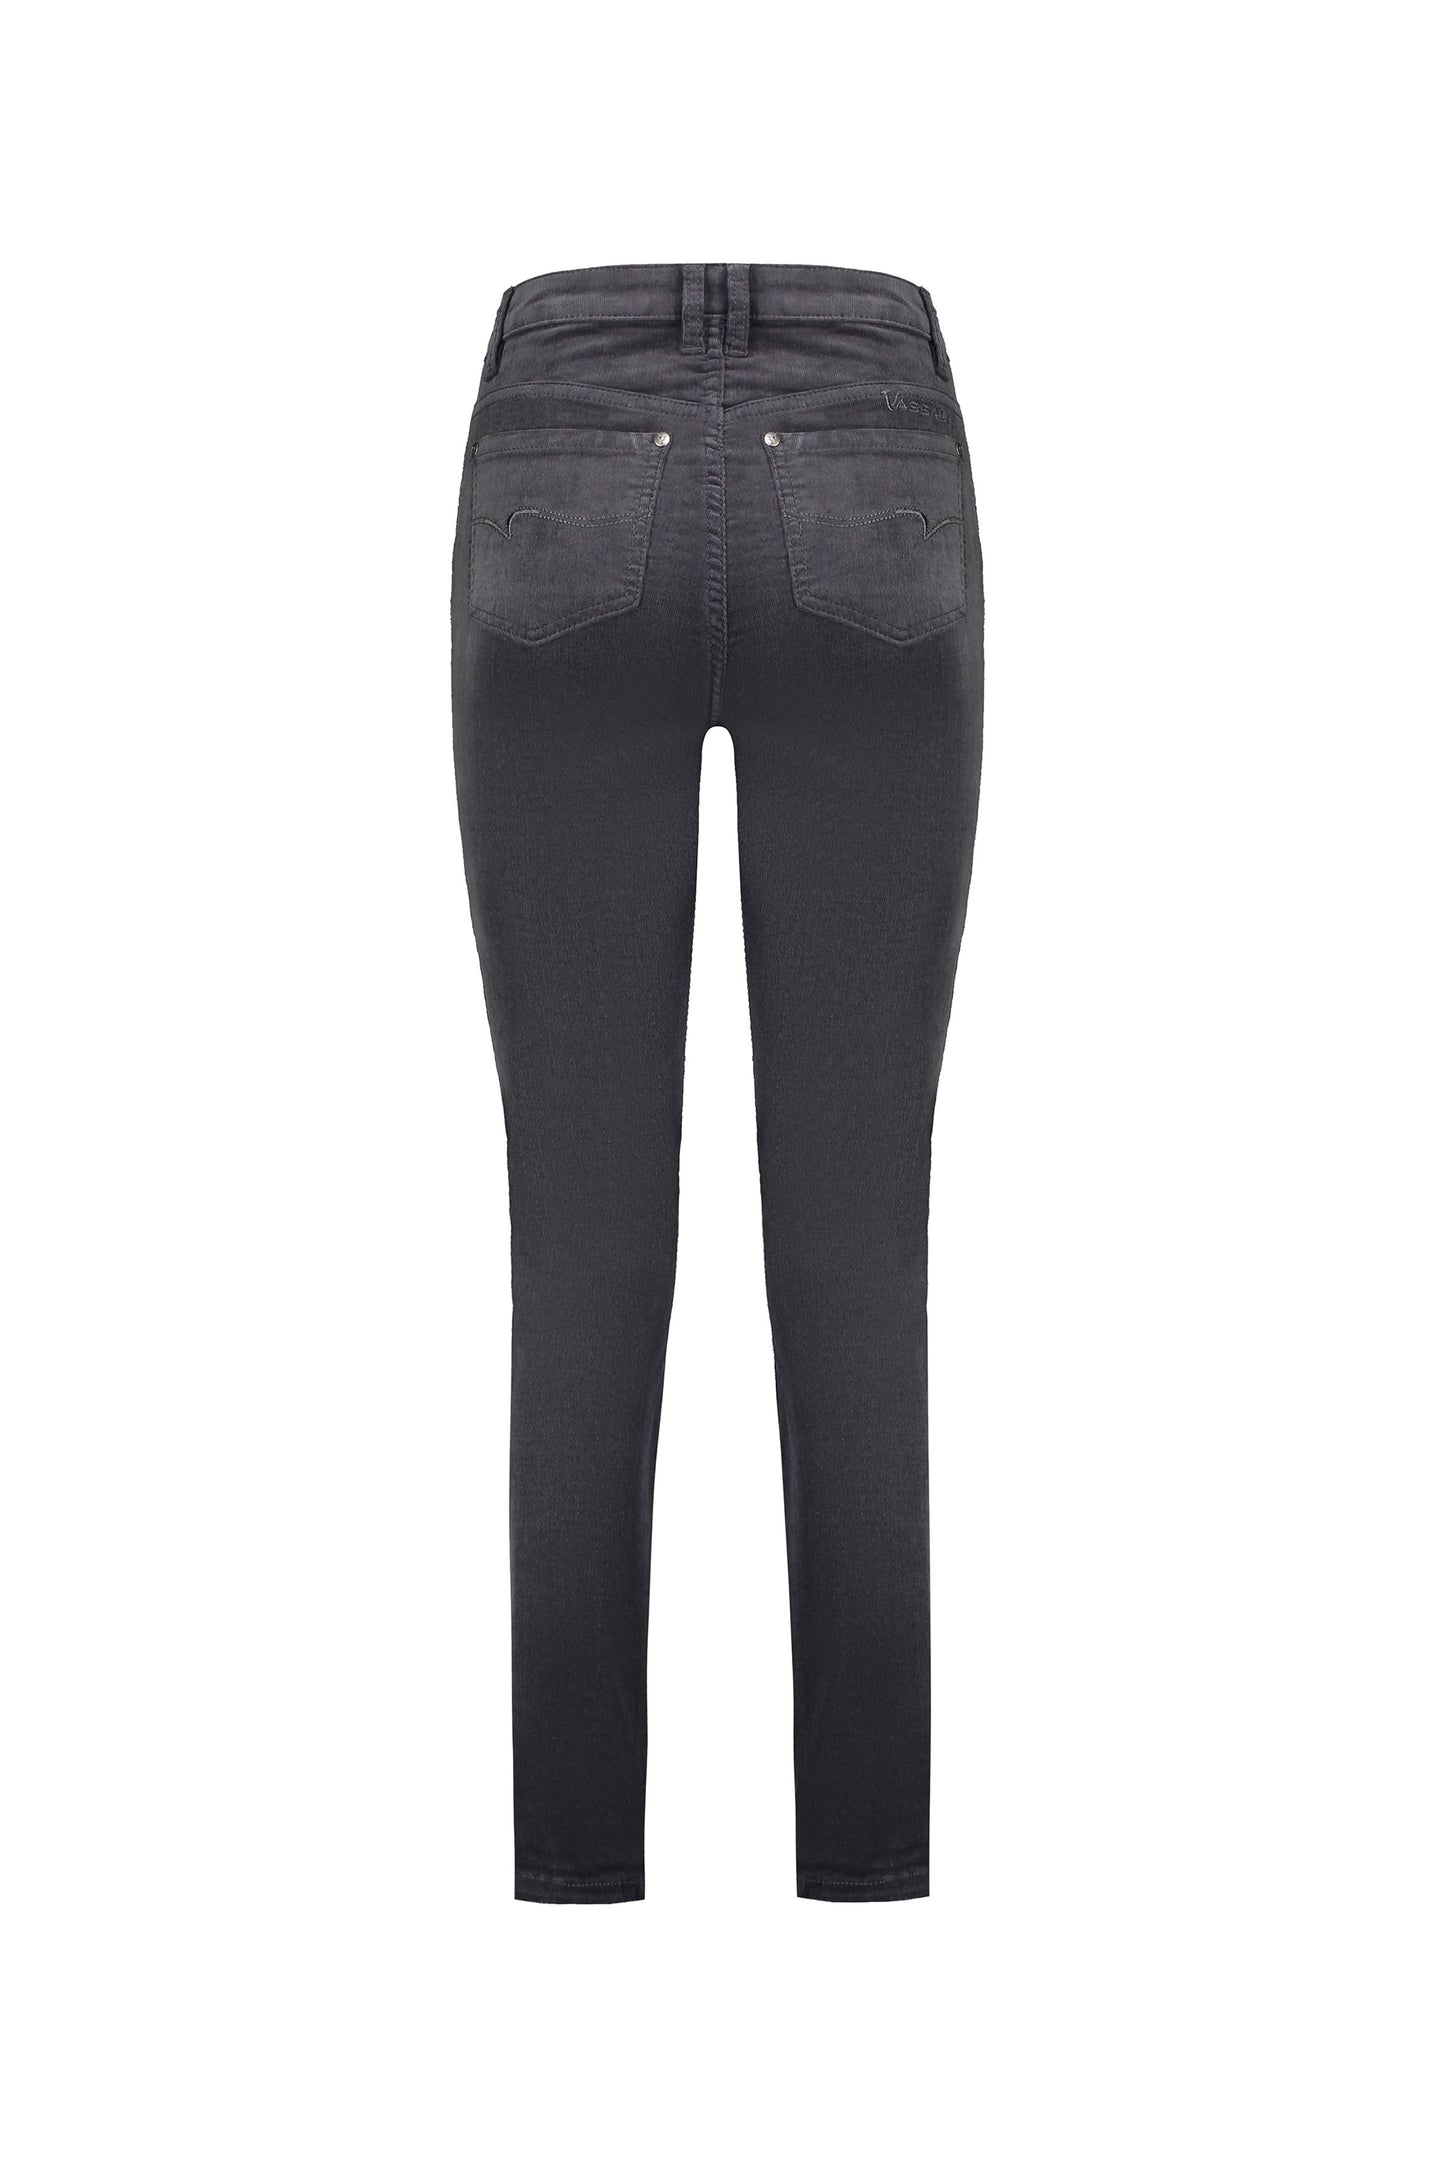 Vassalli - 5911M  Straight Leg Cord Pant with Fly - Charcoal INSTORE - 1  14 left